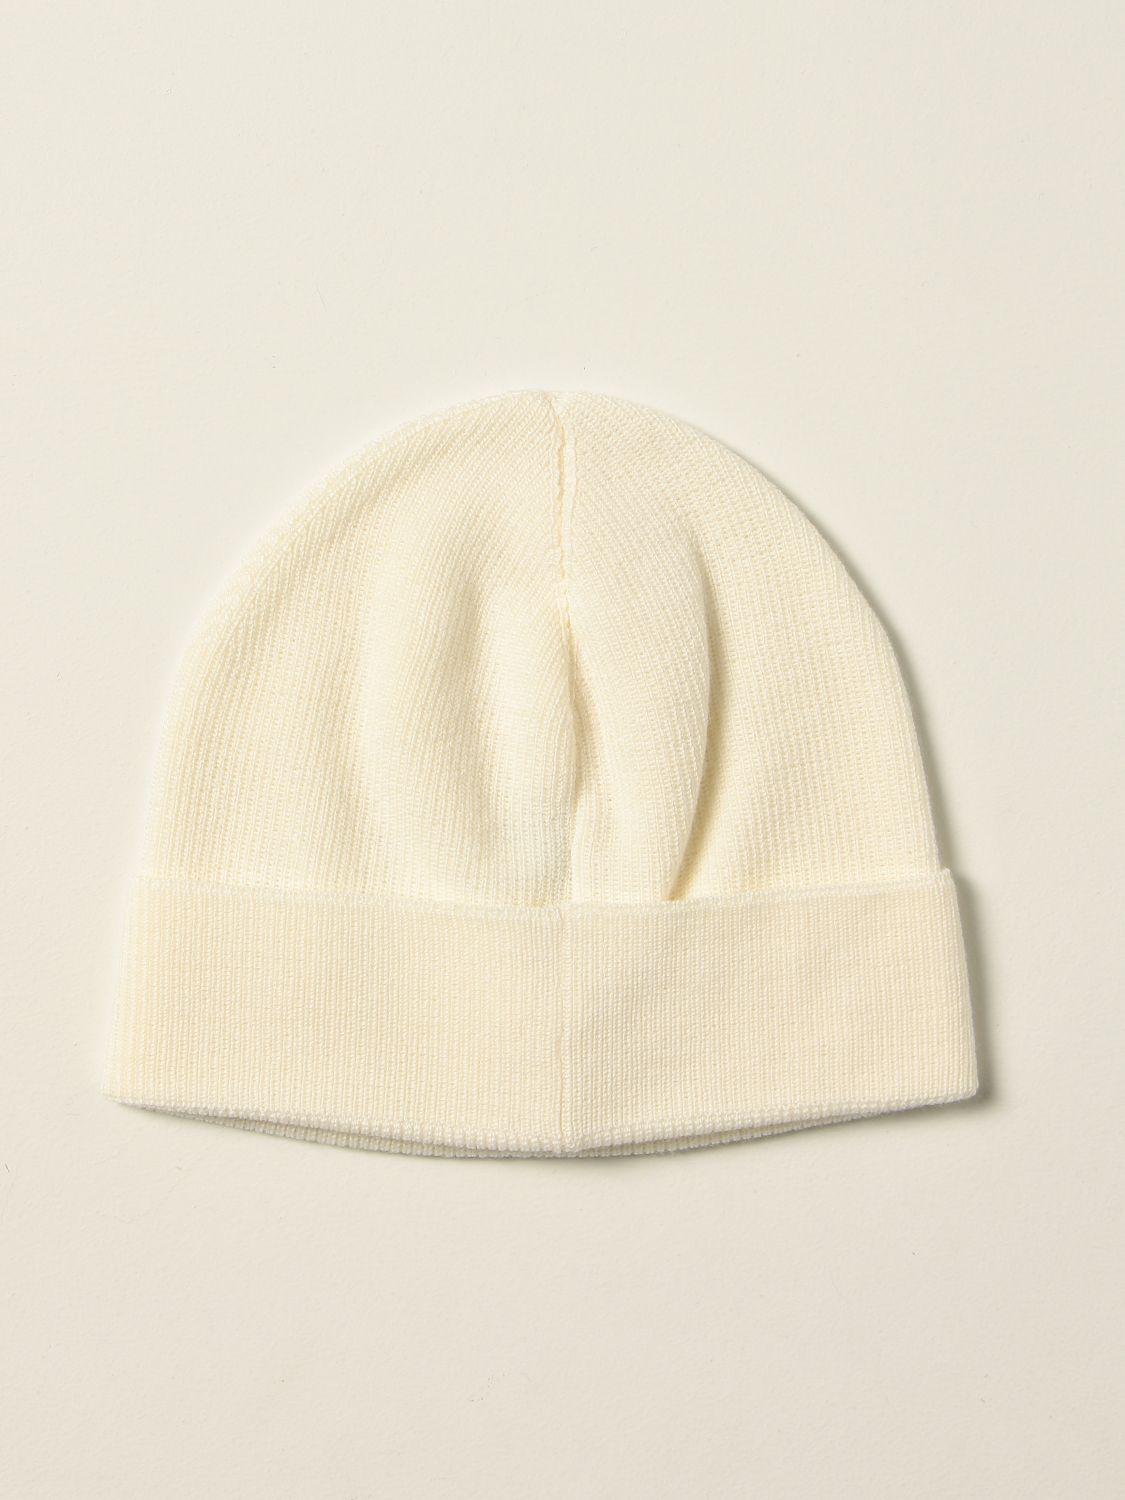 Hat Moncler: Moncler Bobble hat in wool blend yellow cream 2